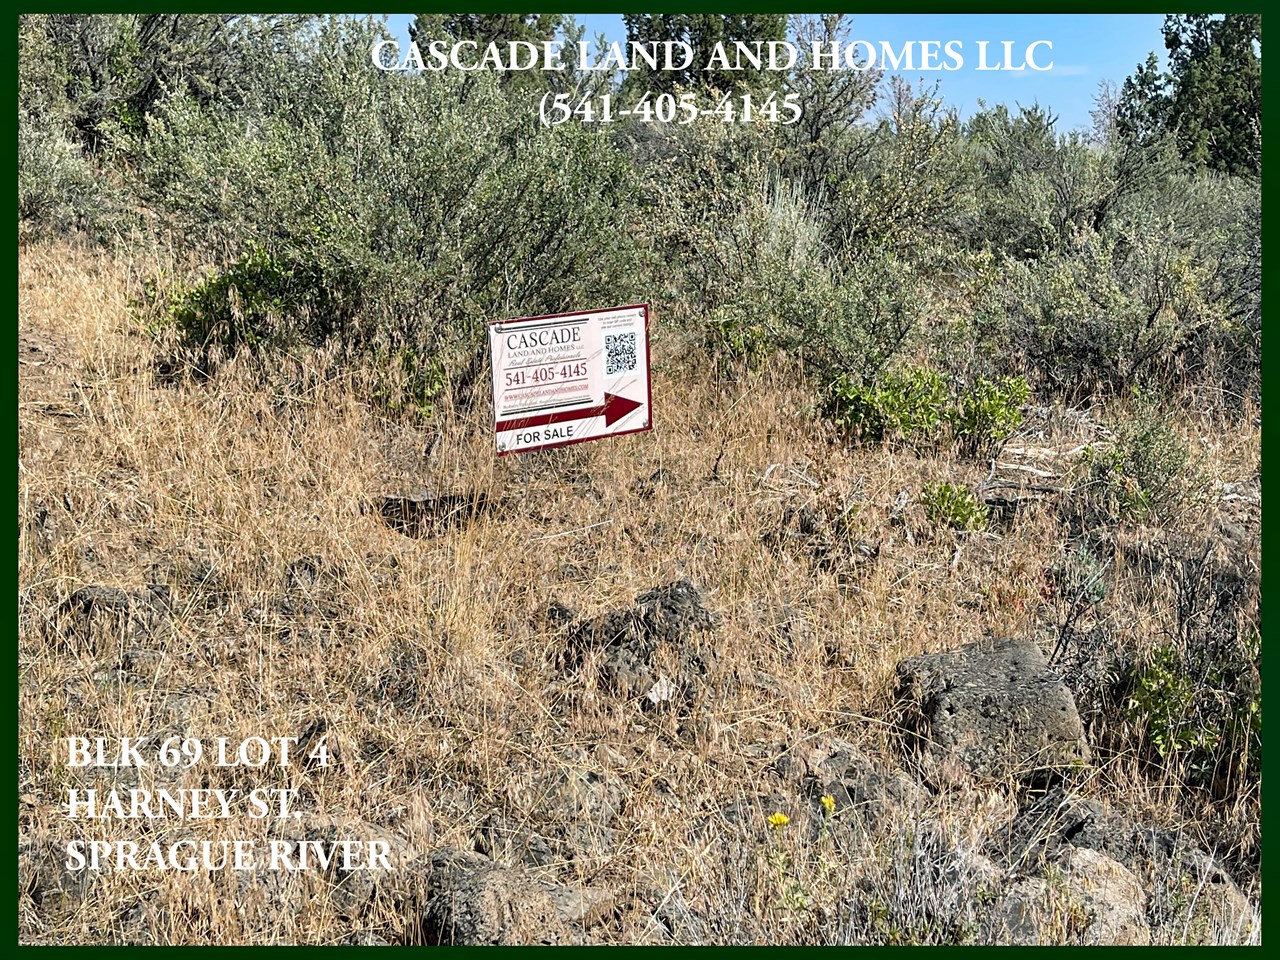 the landscape here is primarily volcanic with stony loam soil that leads down into the sprague river valley. the property would need a well and septic. neighbors and the county well reports both indicate that wells are productive in the area.